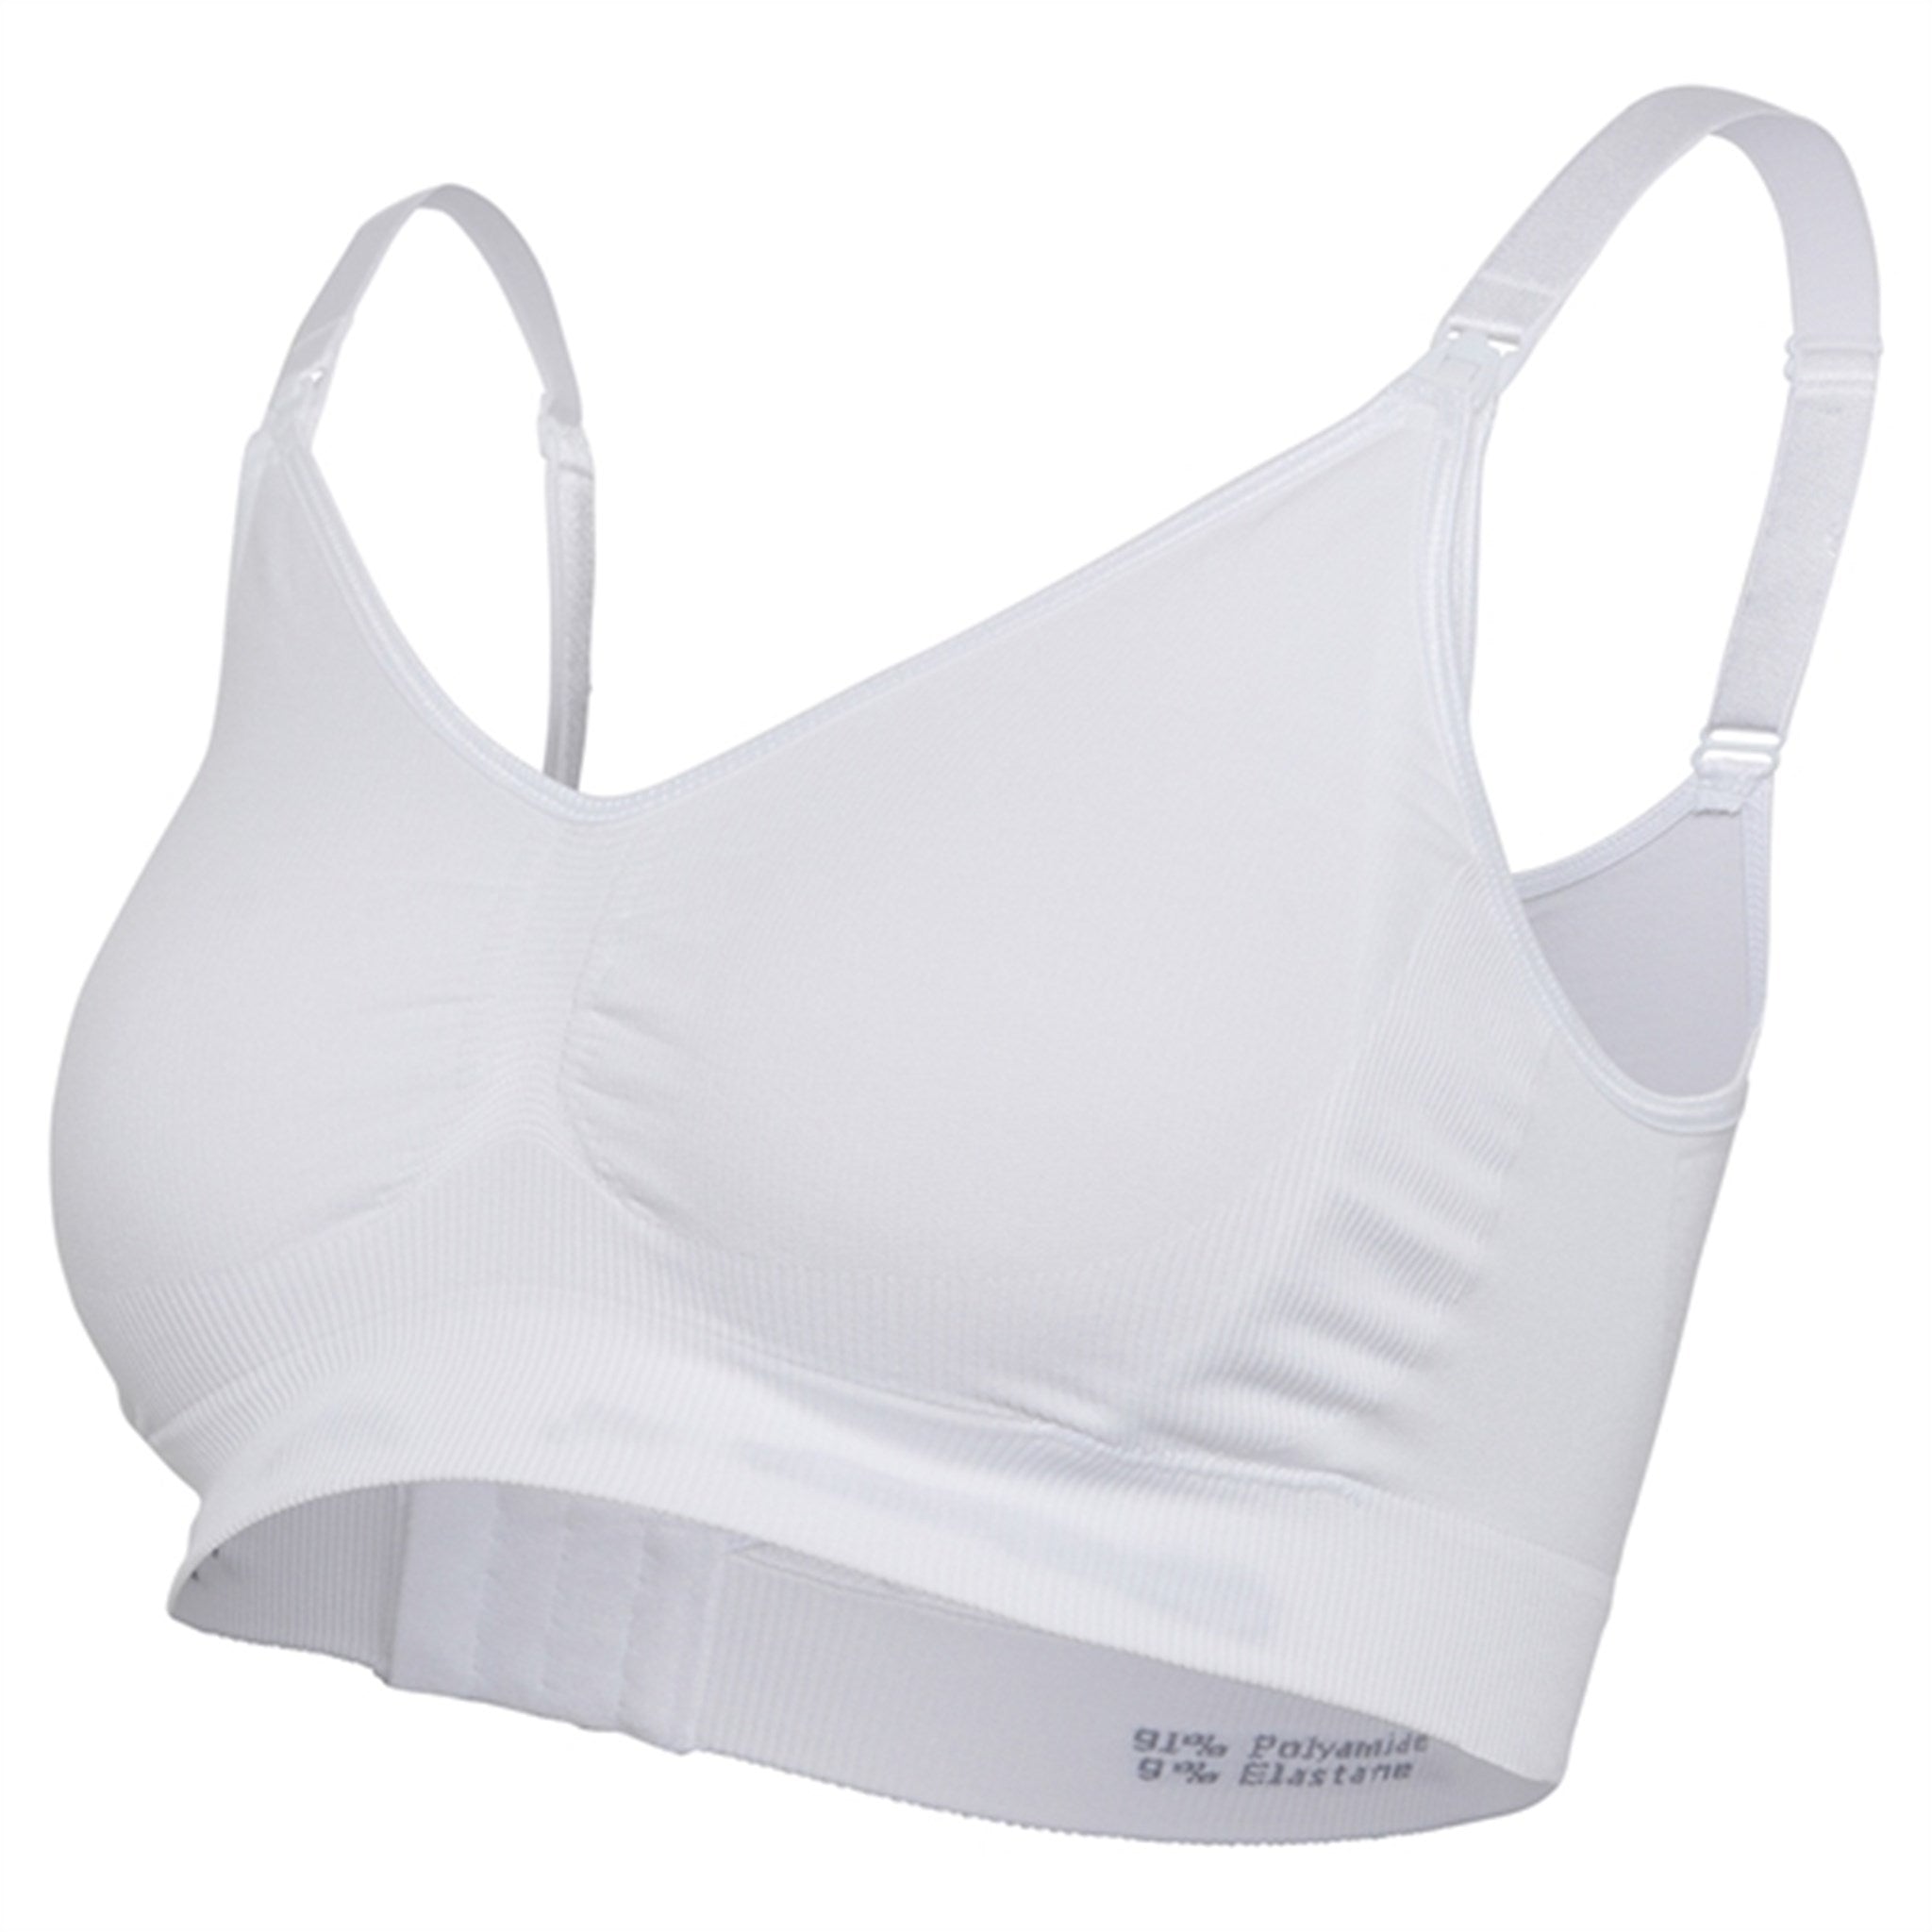 Carriwell Carriwell Maternity And Nursing Bra White